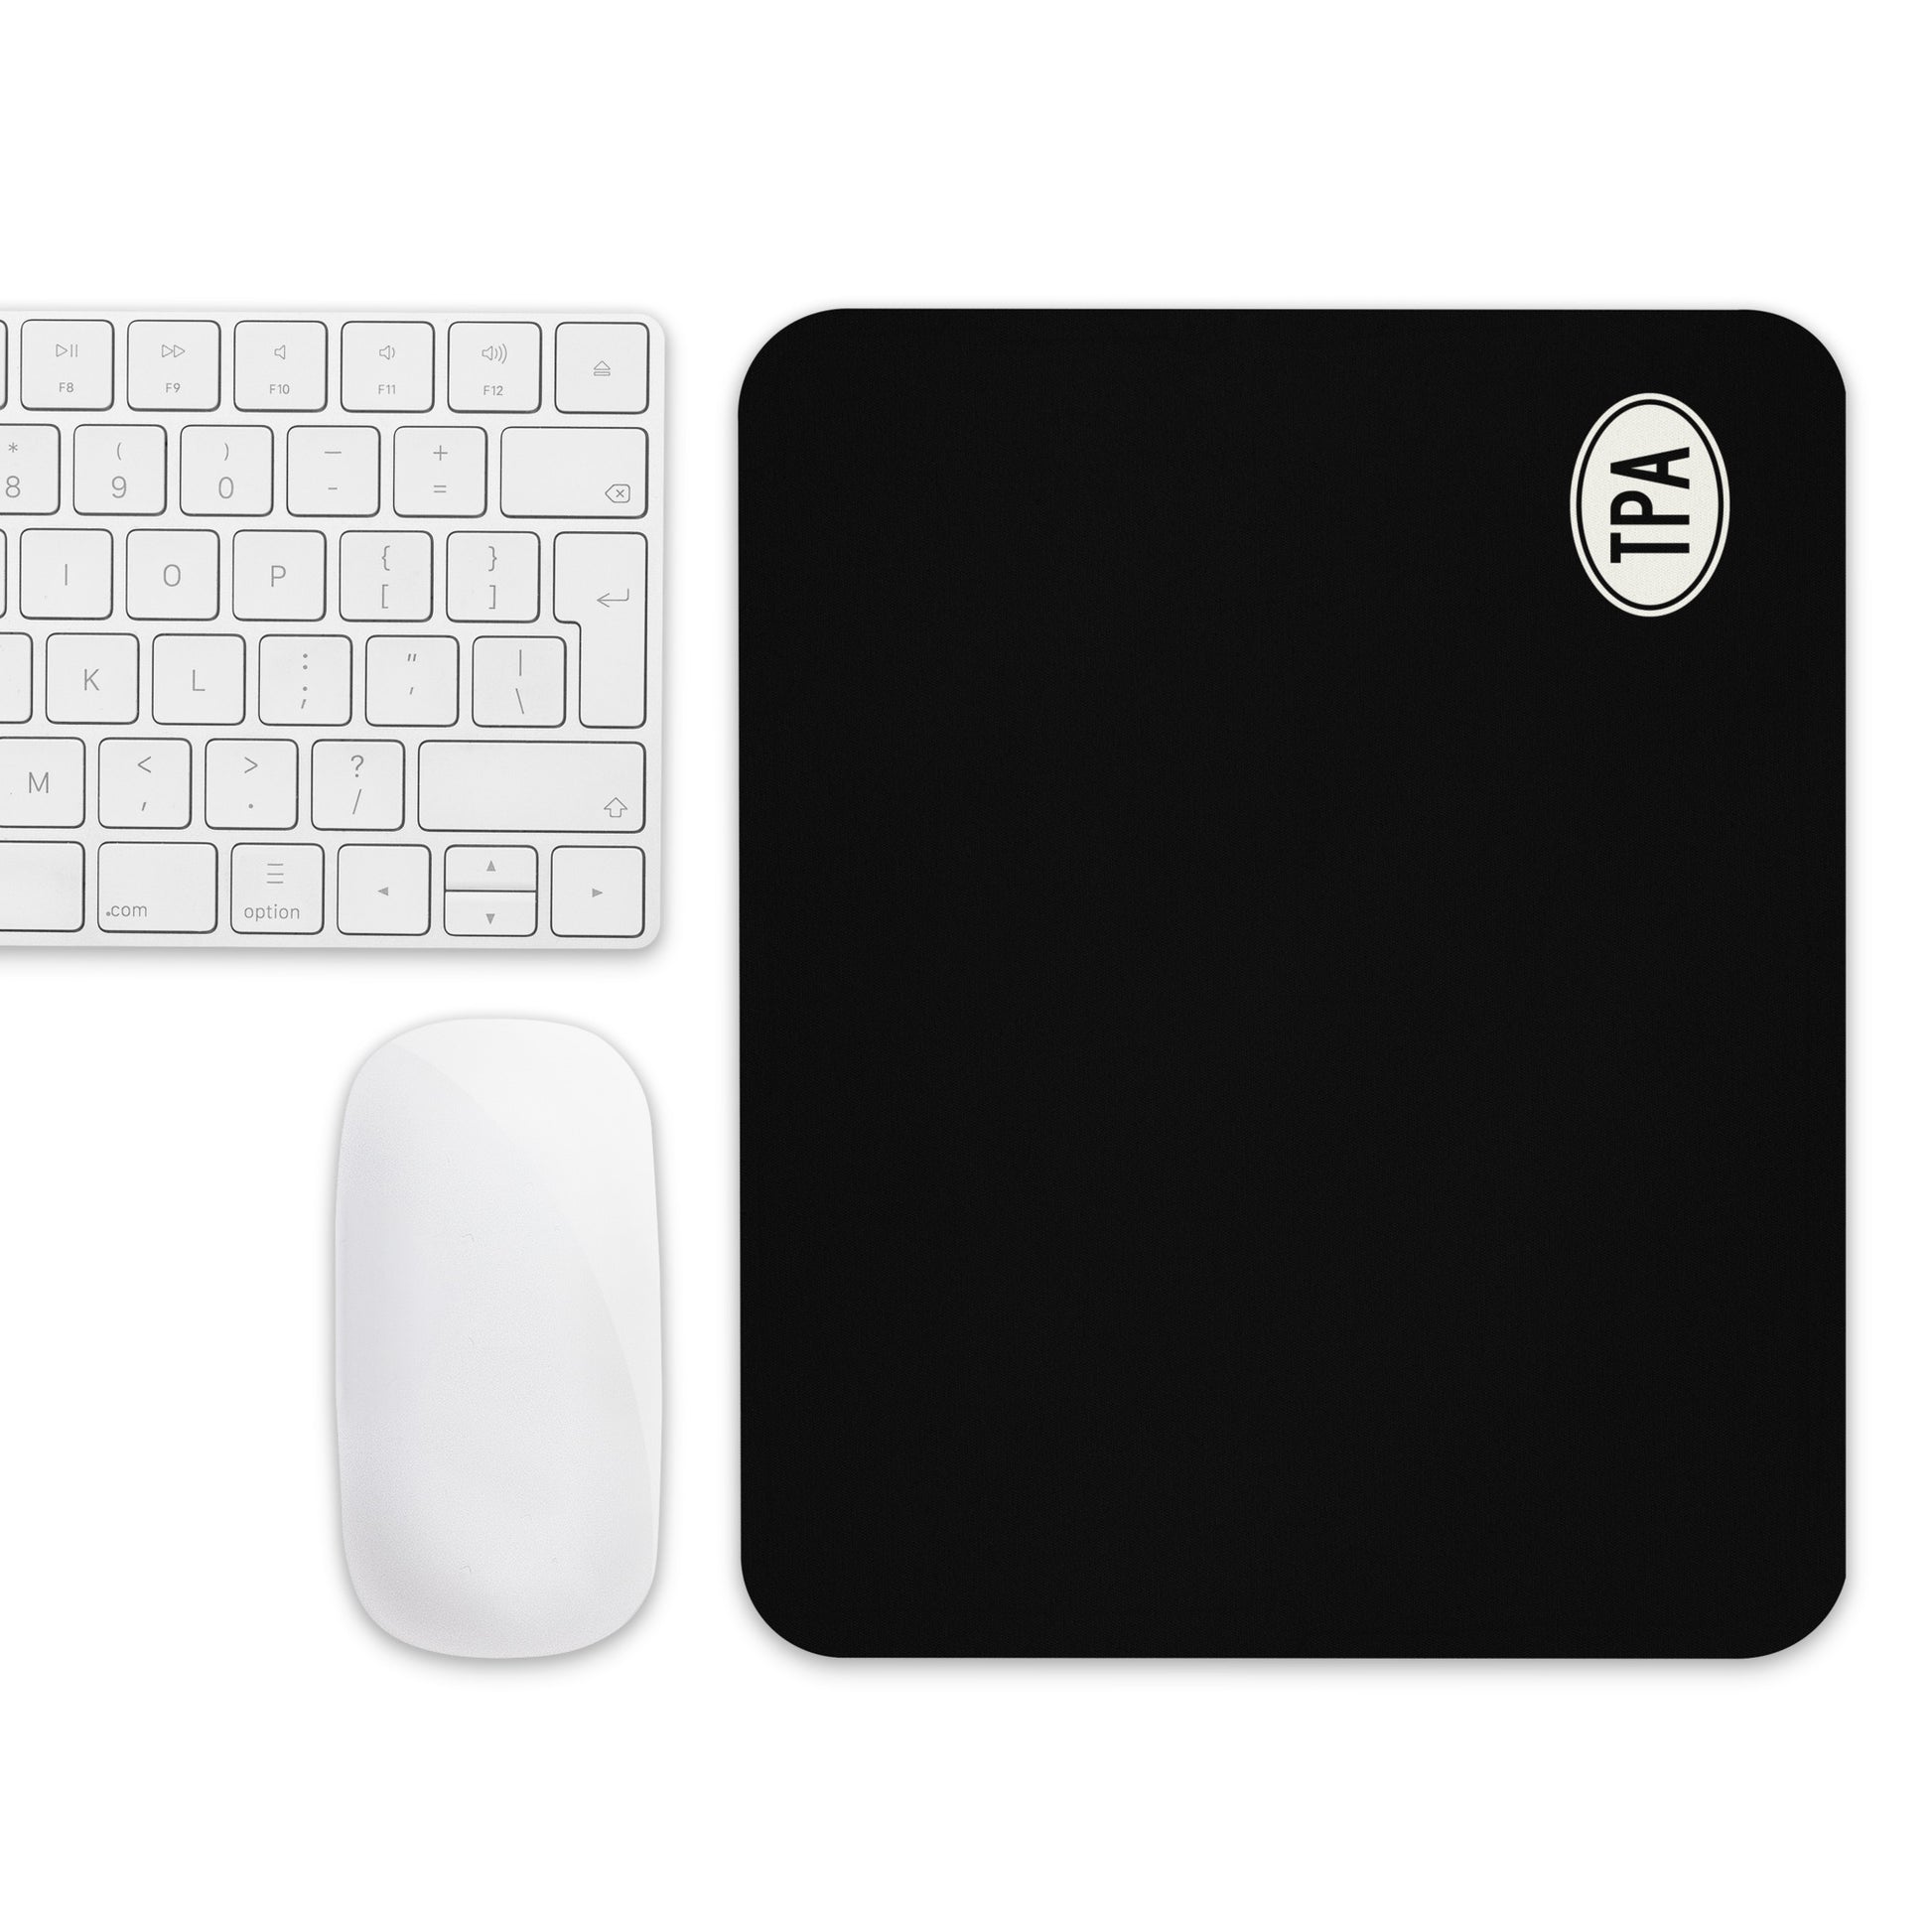 Unique Travel Gift Mouse Pad - White Oval • TPA Tampa • YHM Designs - Image 04